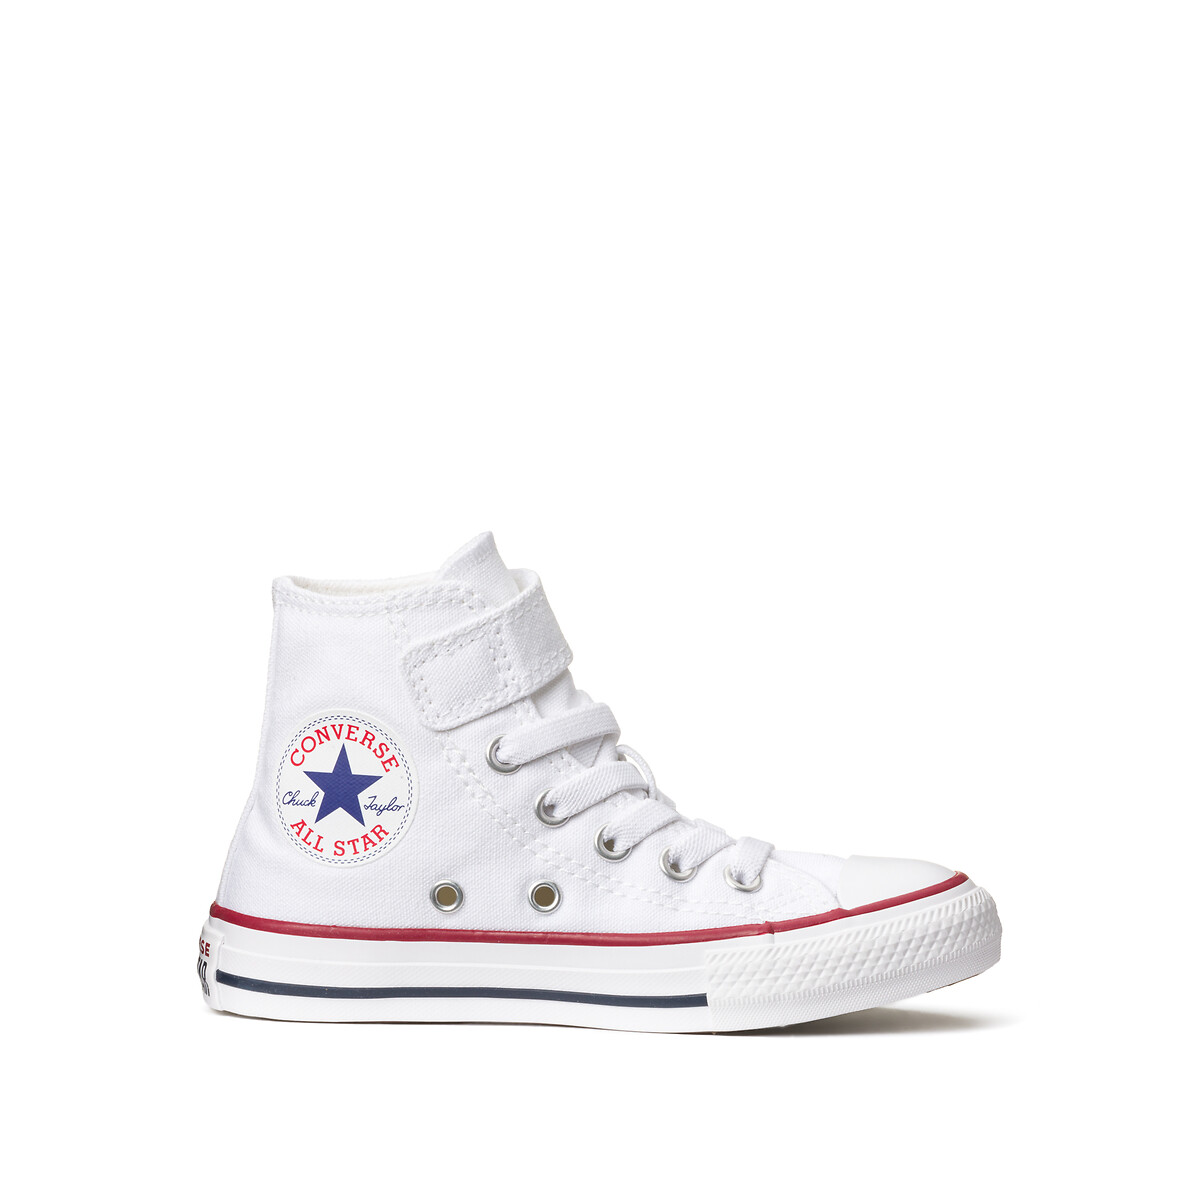 Kids chuck taylor all star 1v canvas high top trainers , white ...